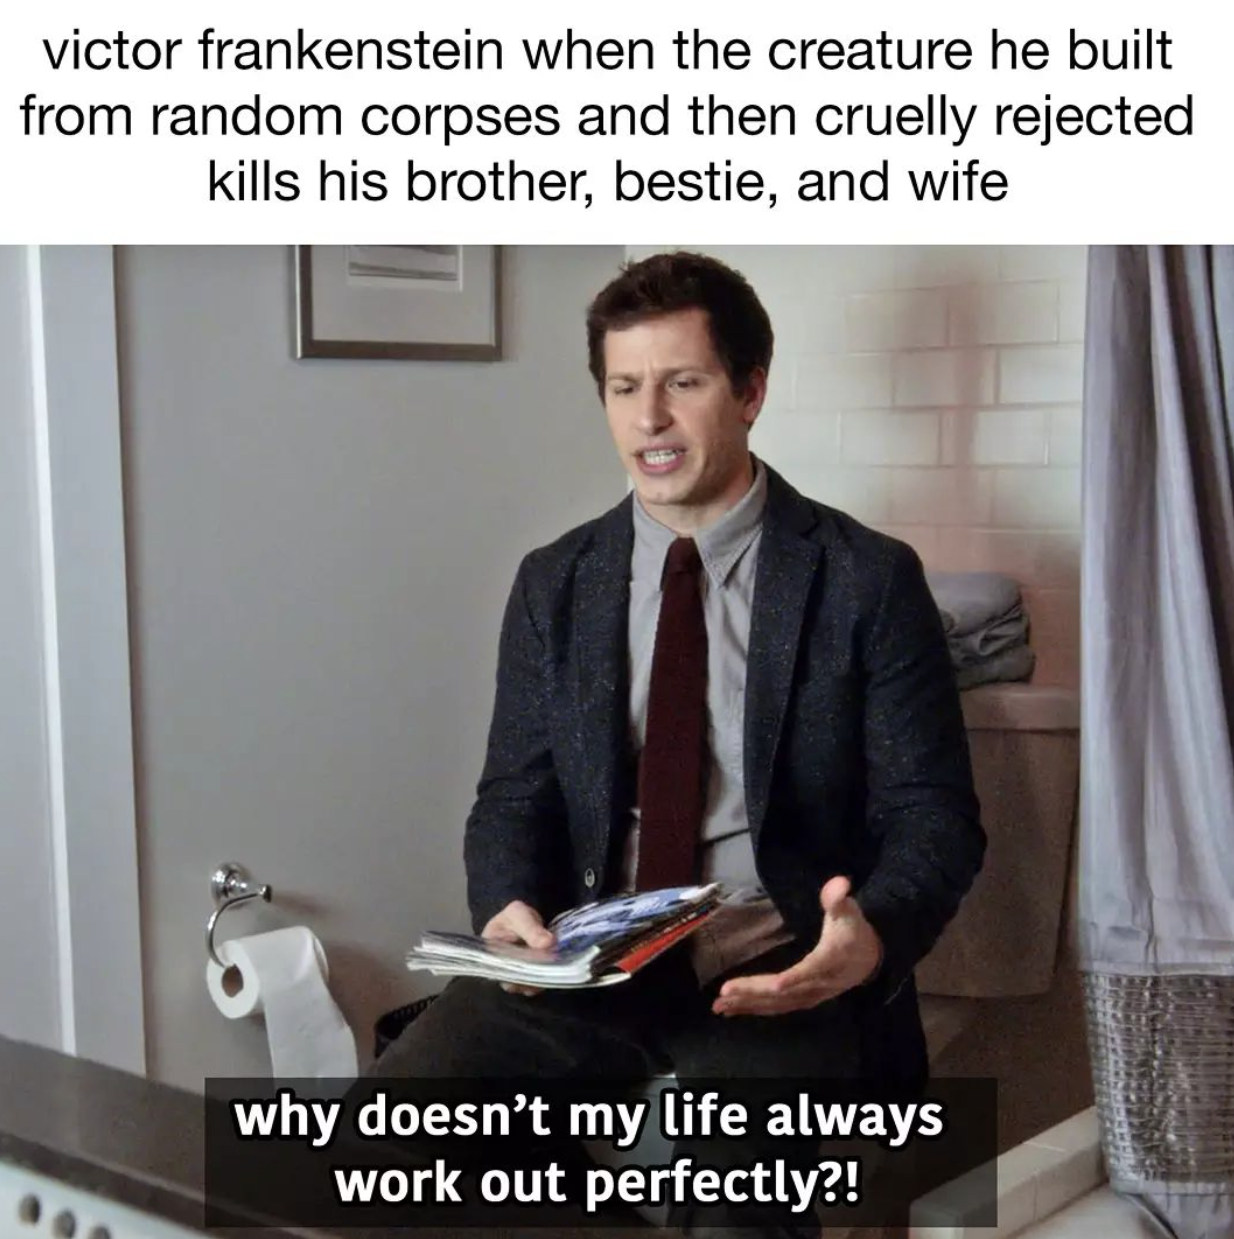 SparkNotes memes - presentation - victor frankenstein when the creature he built from random corpses and then cruelly rejected kills his brother, bestie, and wife why doesn't my life always work out perfectly?!